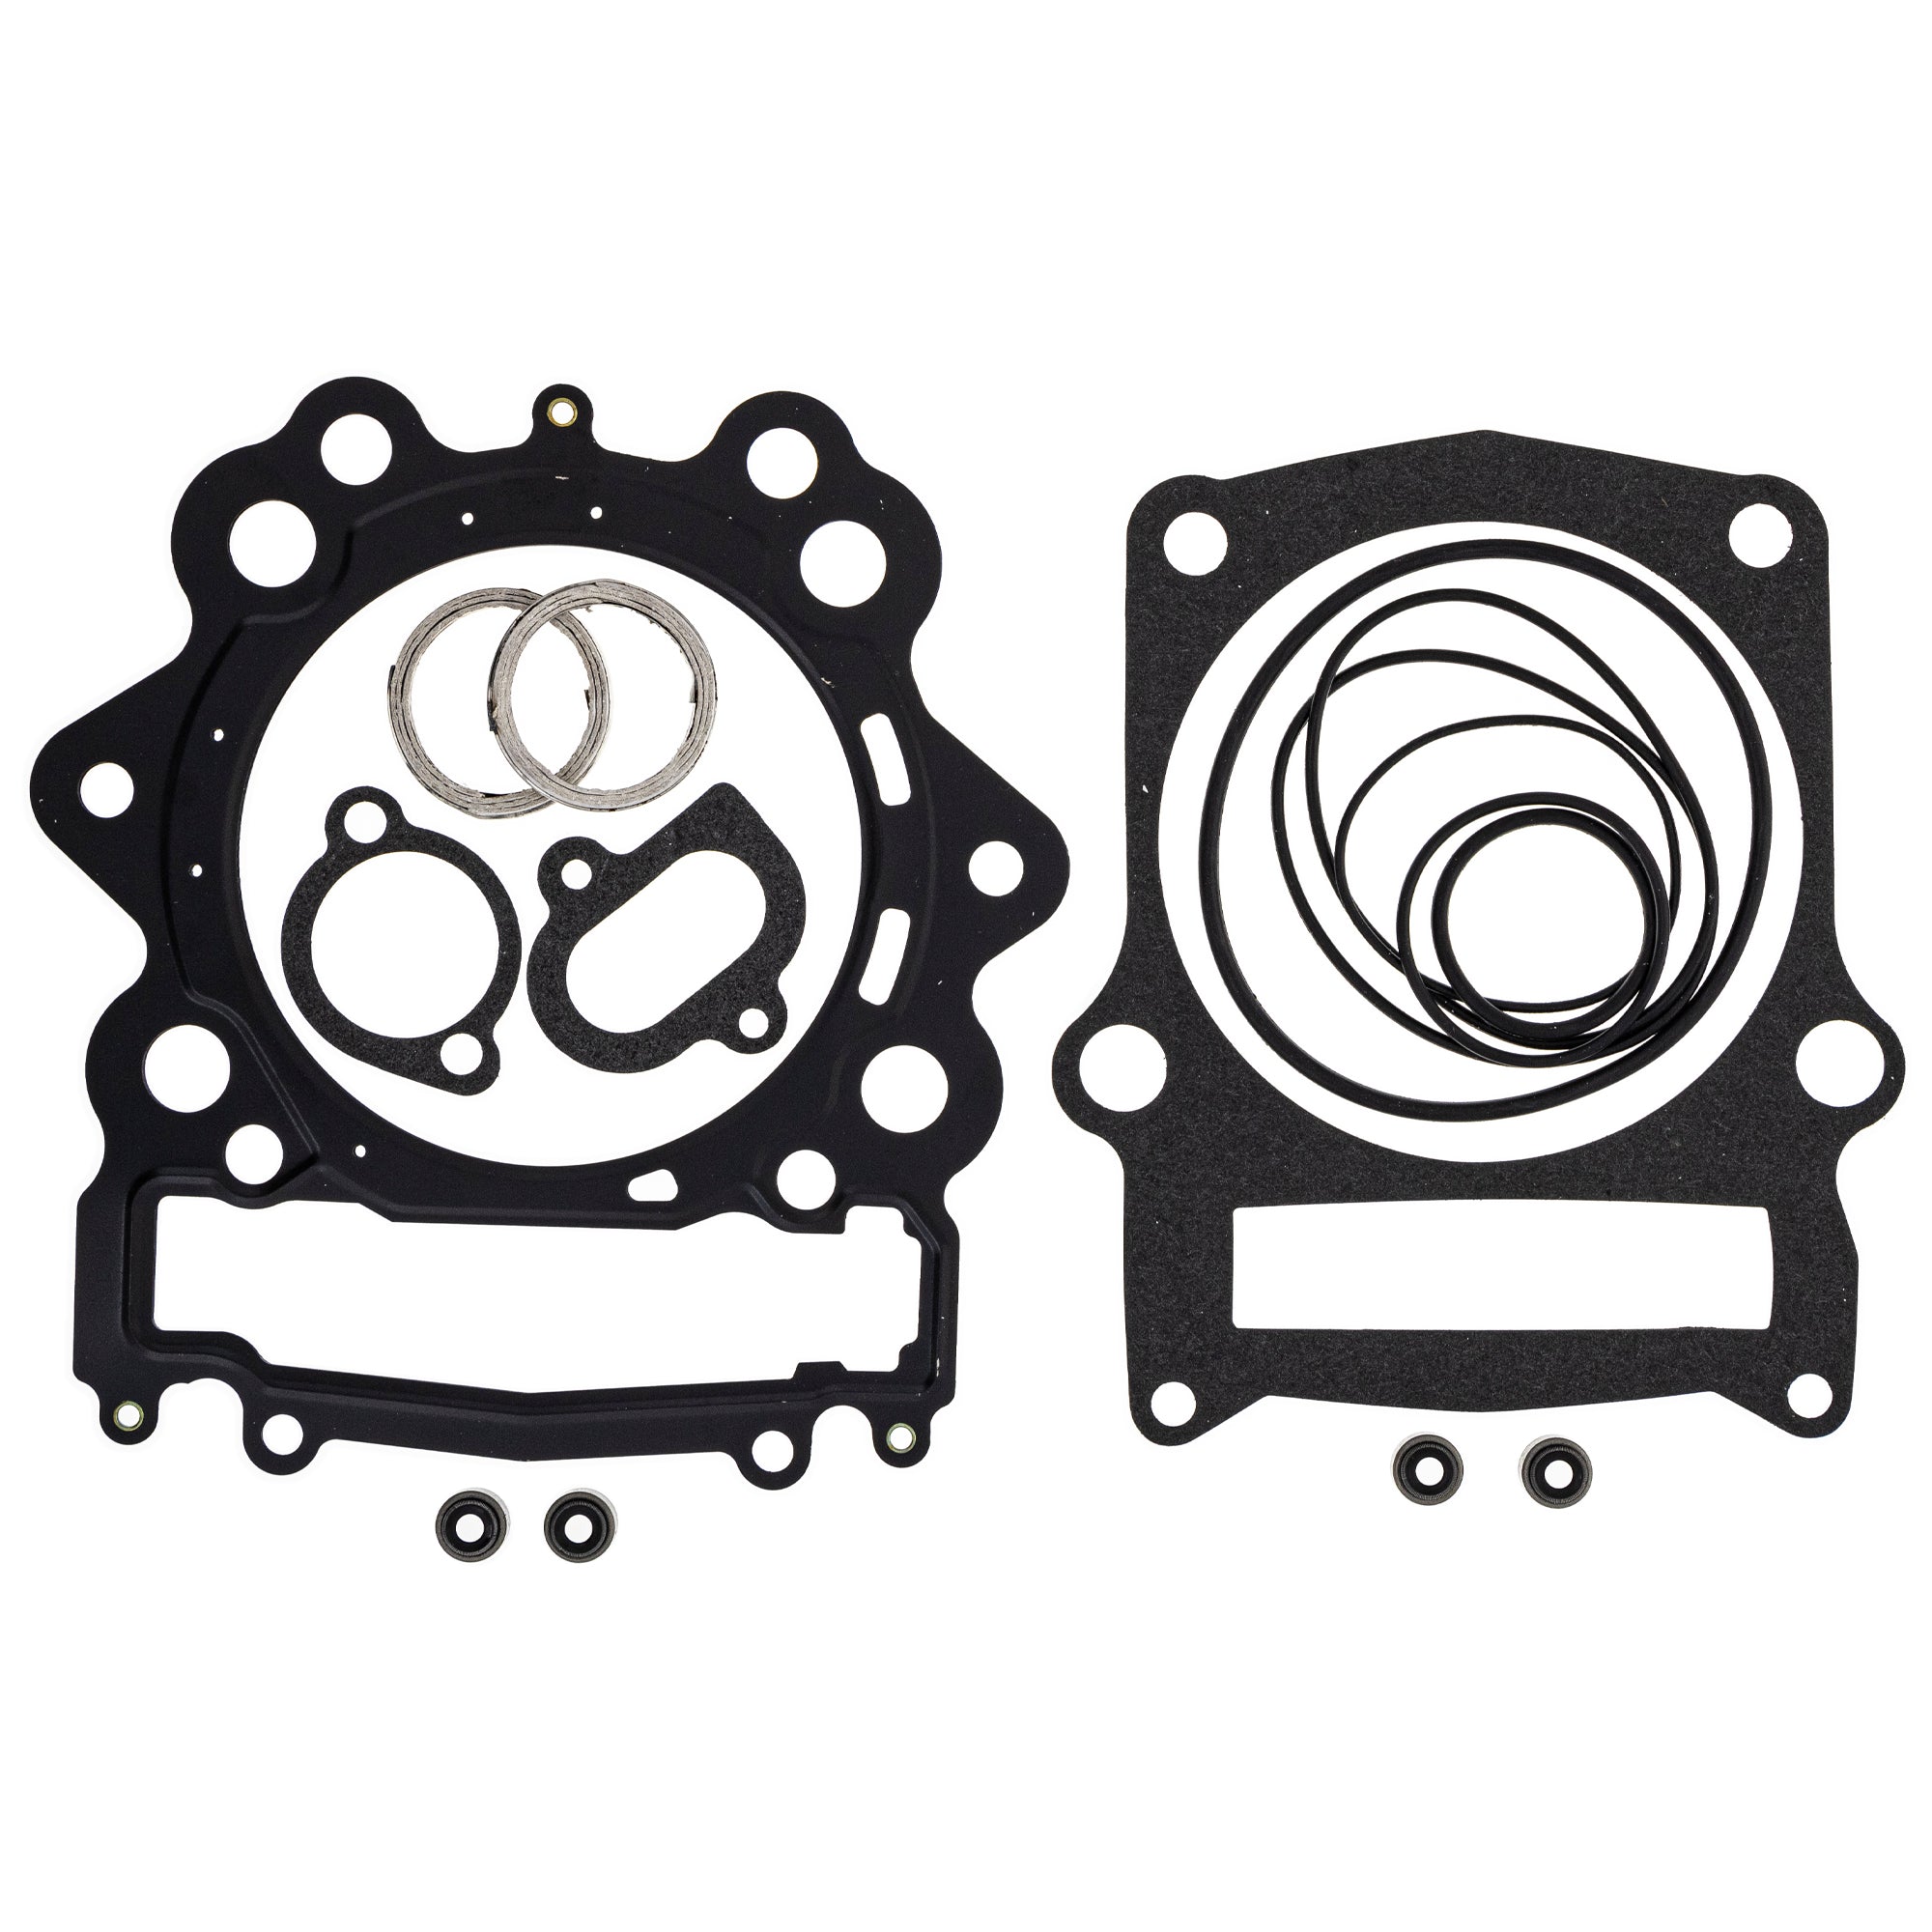 734cc Big Bore Cylinder Gasket Kit for Yamaha Grizzly 550 1S3-11310-01